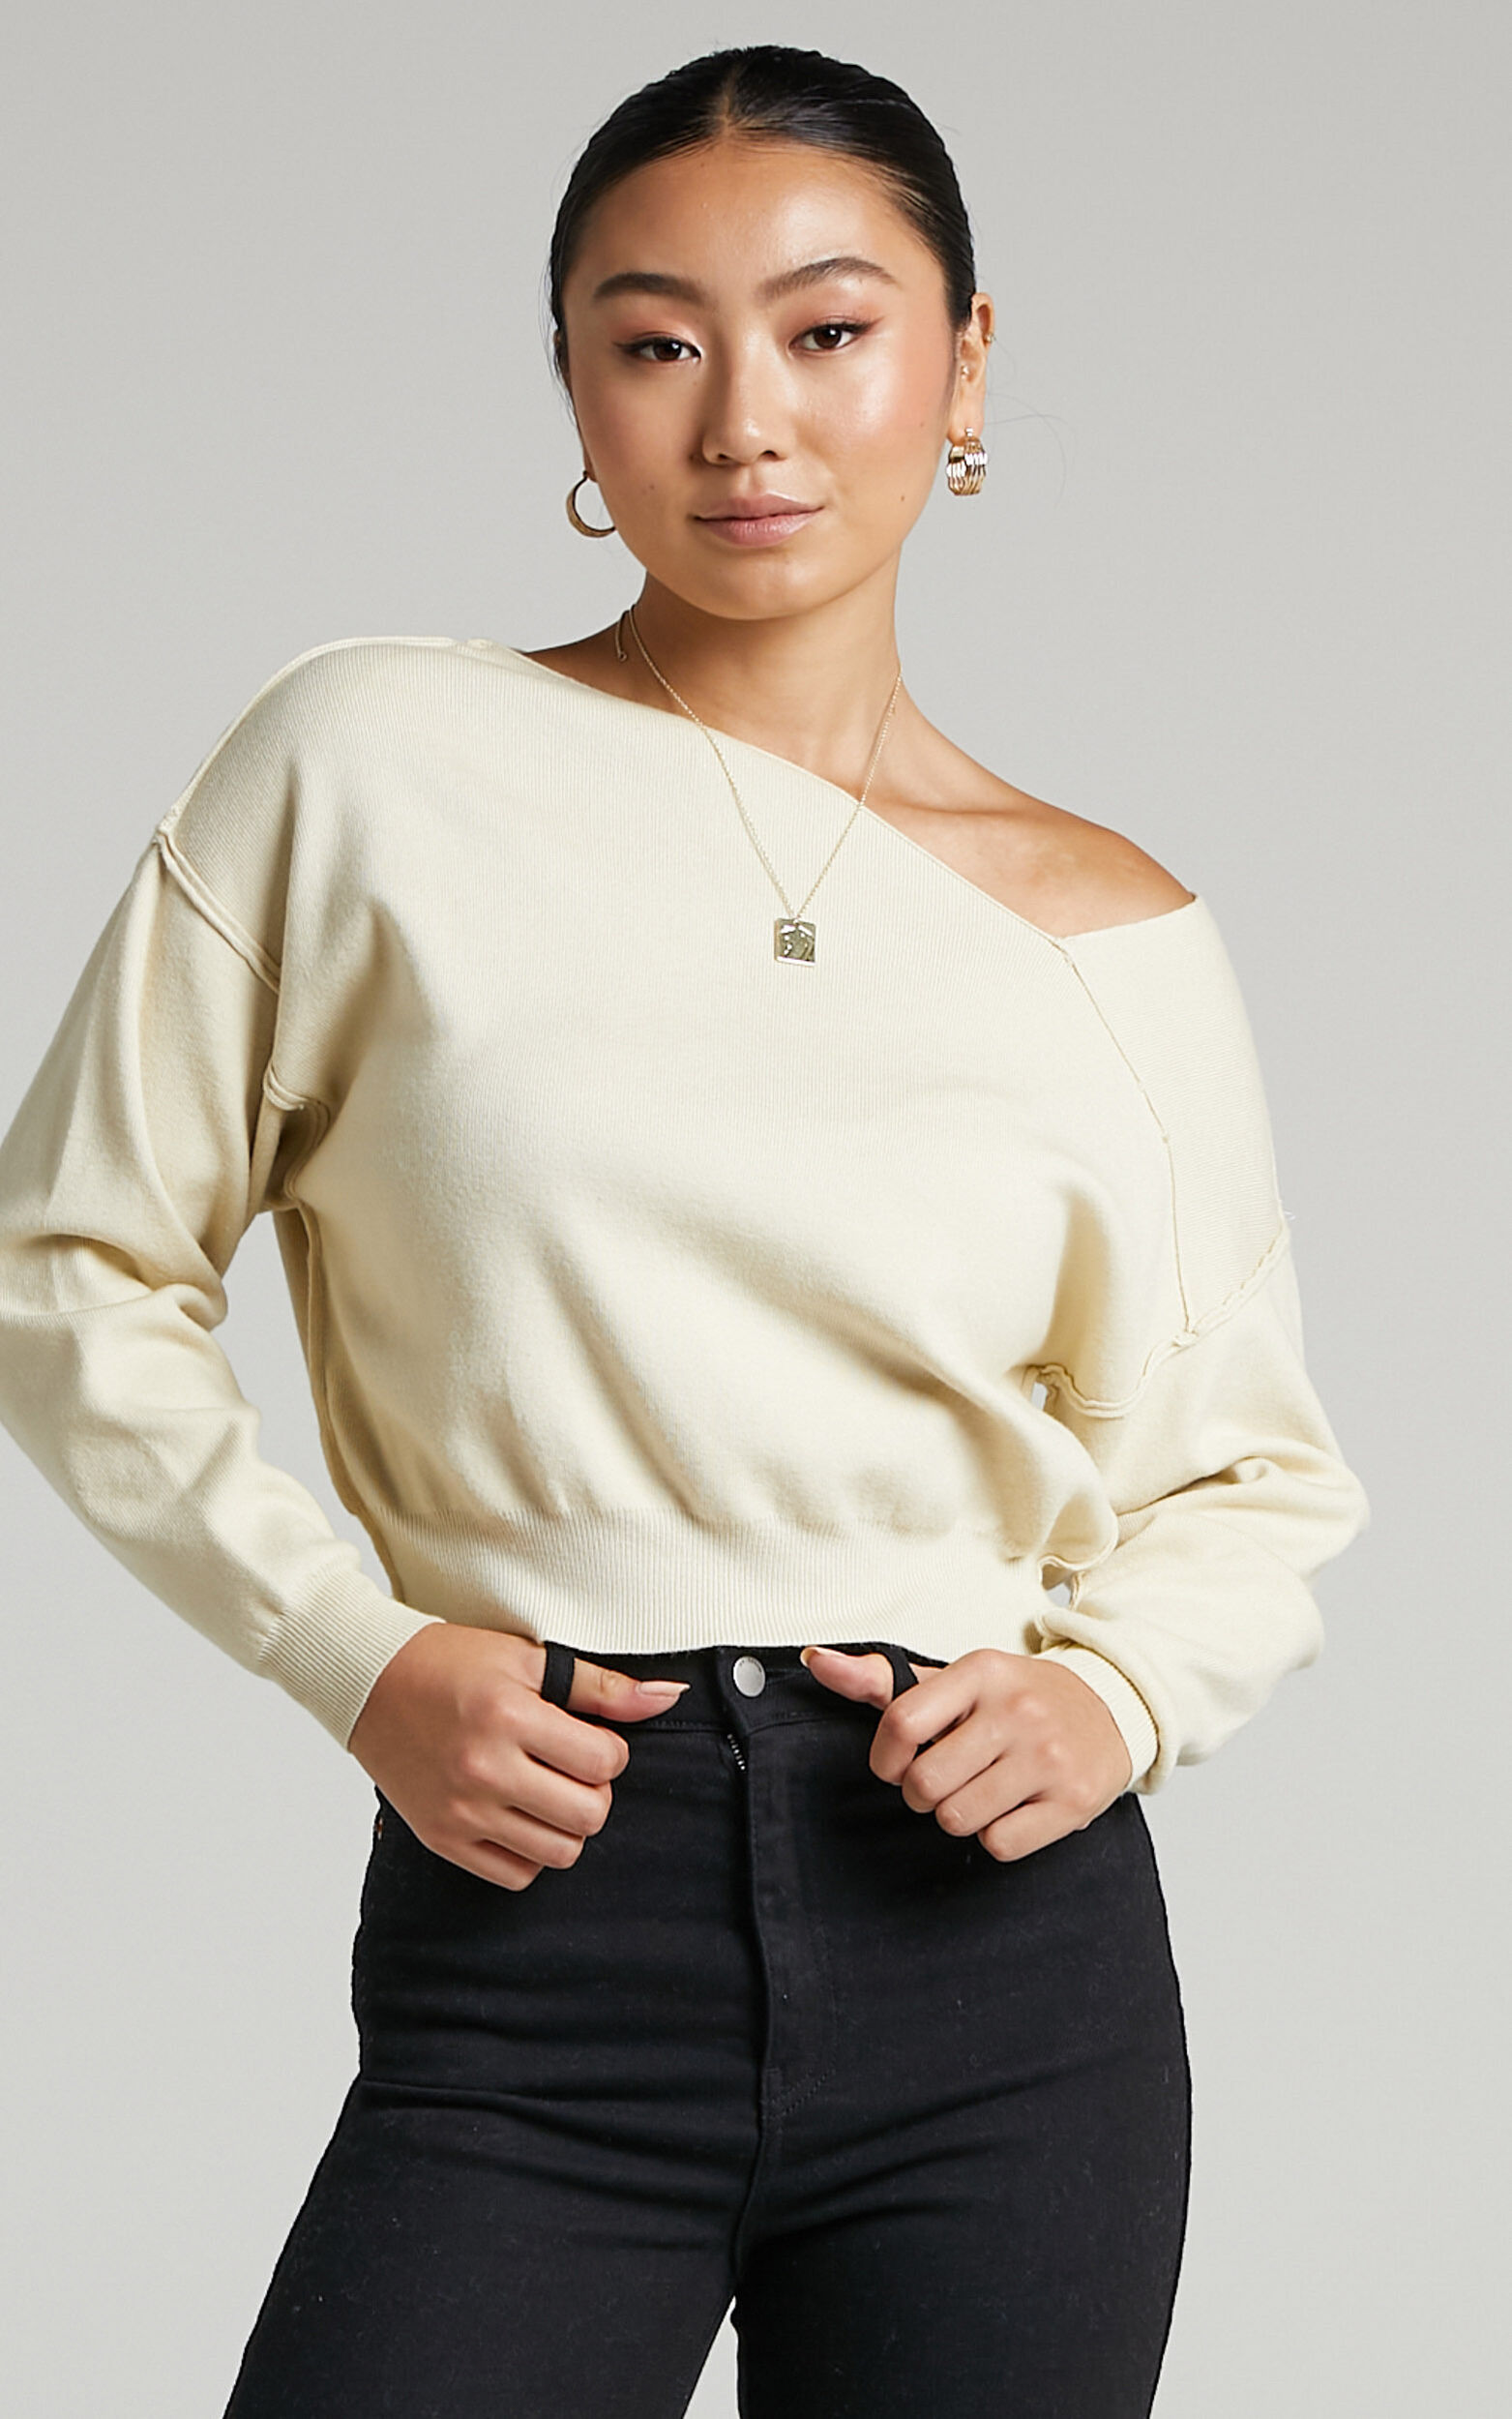 Kamille Top - Asymmetric Side Shoulder Knit Top in Off White - 04, CRE2